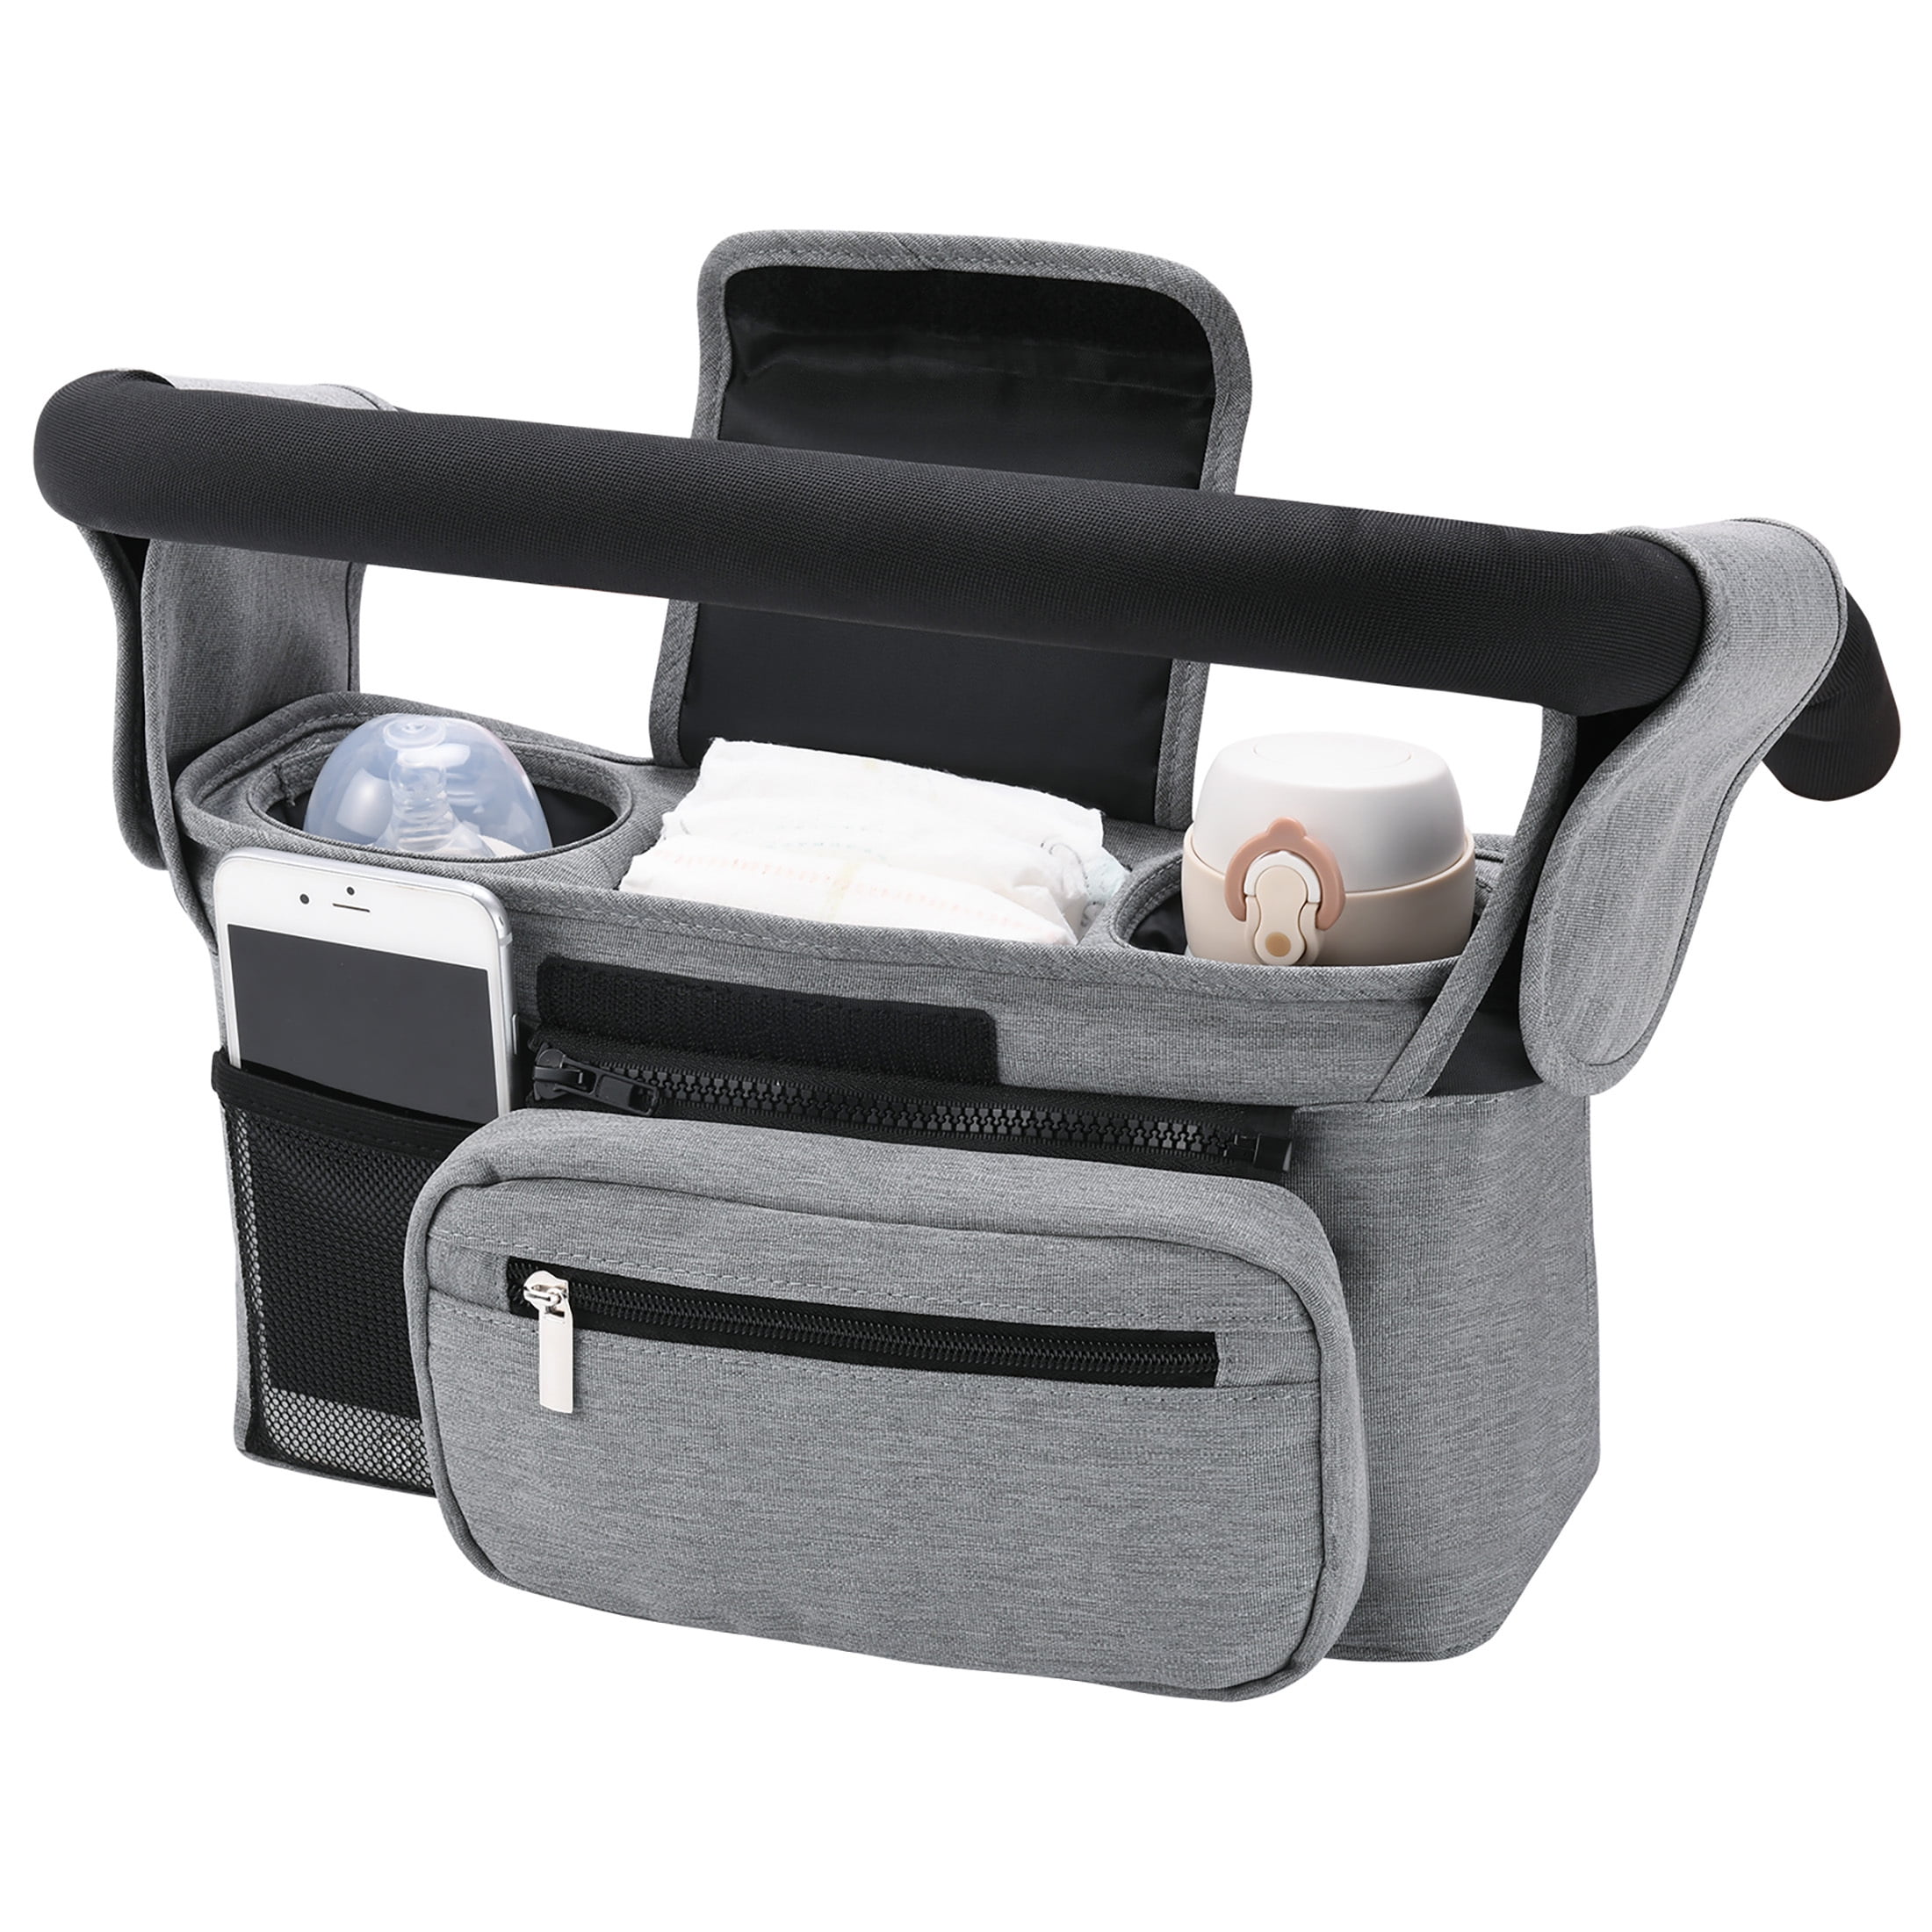 Extra Large Space NEW Stroller Organizer Baby Accessory Two Deep Cup Holders 